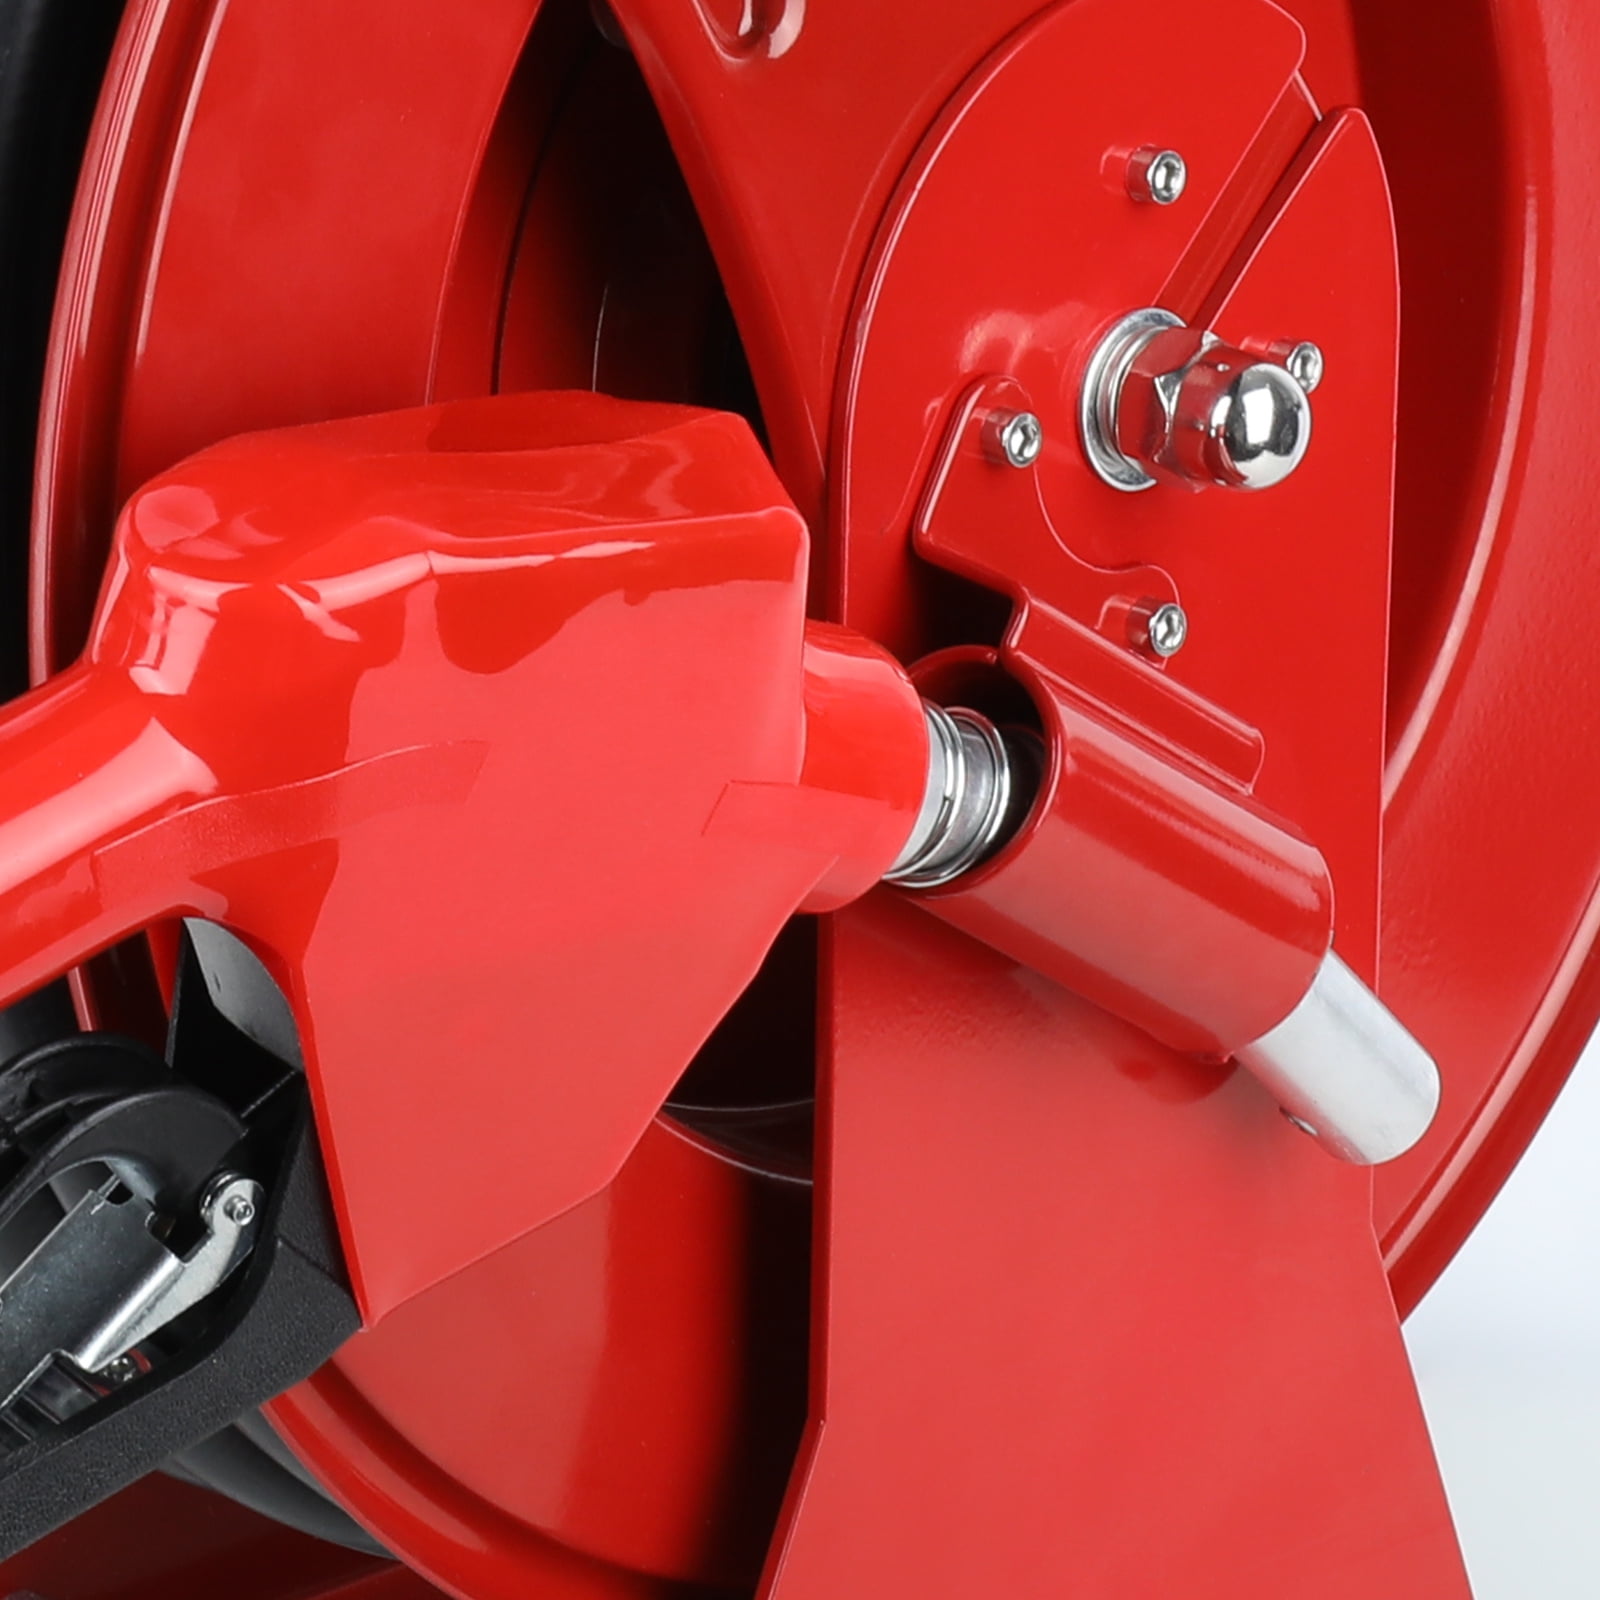 Fitnet Fuel Hose Reel Retractable with Fueling Nozzle 3/4 x 66